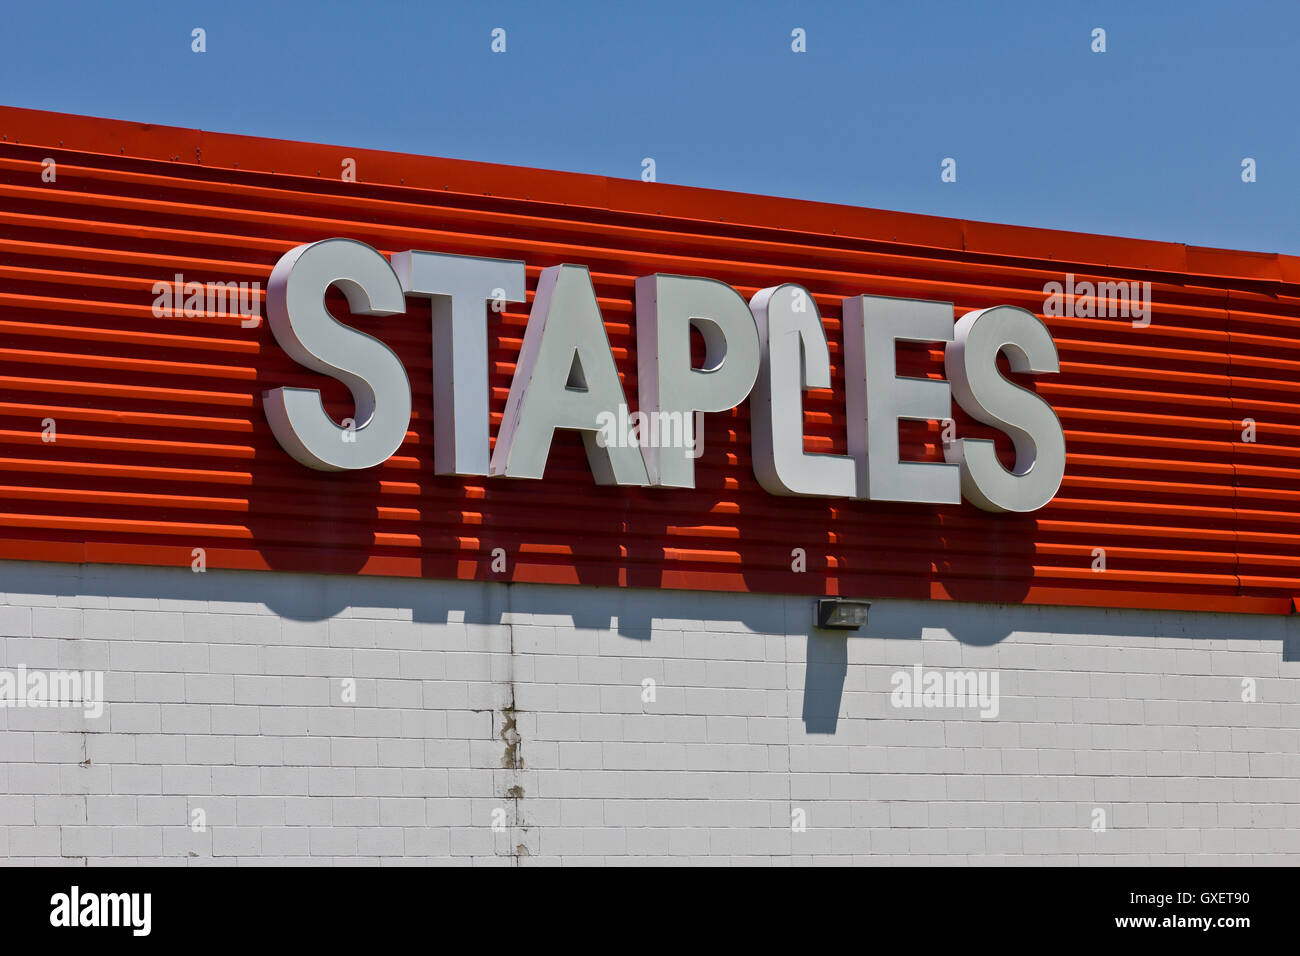 Indianapolis - Circa June 2016: Staples Inc. Retail Location. Staples is a Large Office Supply Chain I Stock Photo